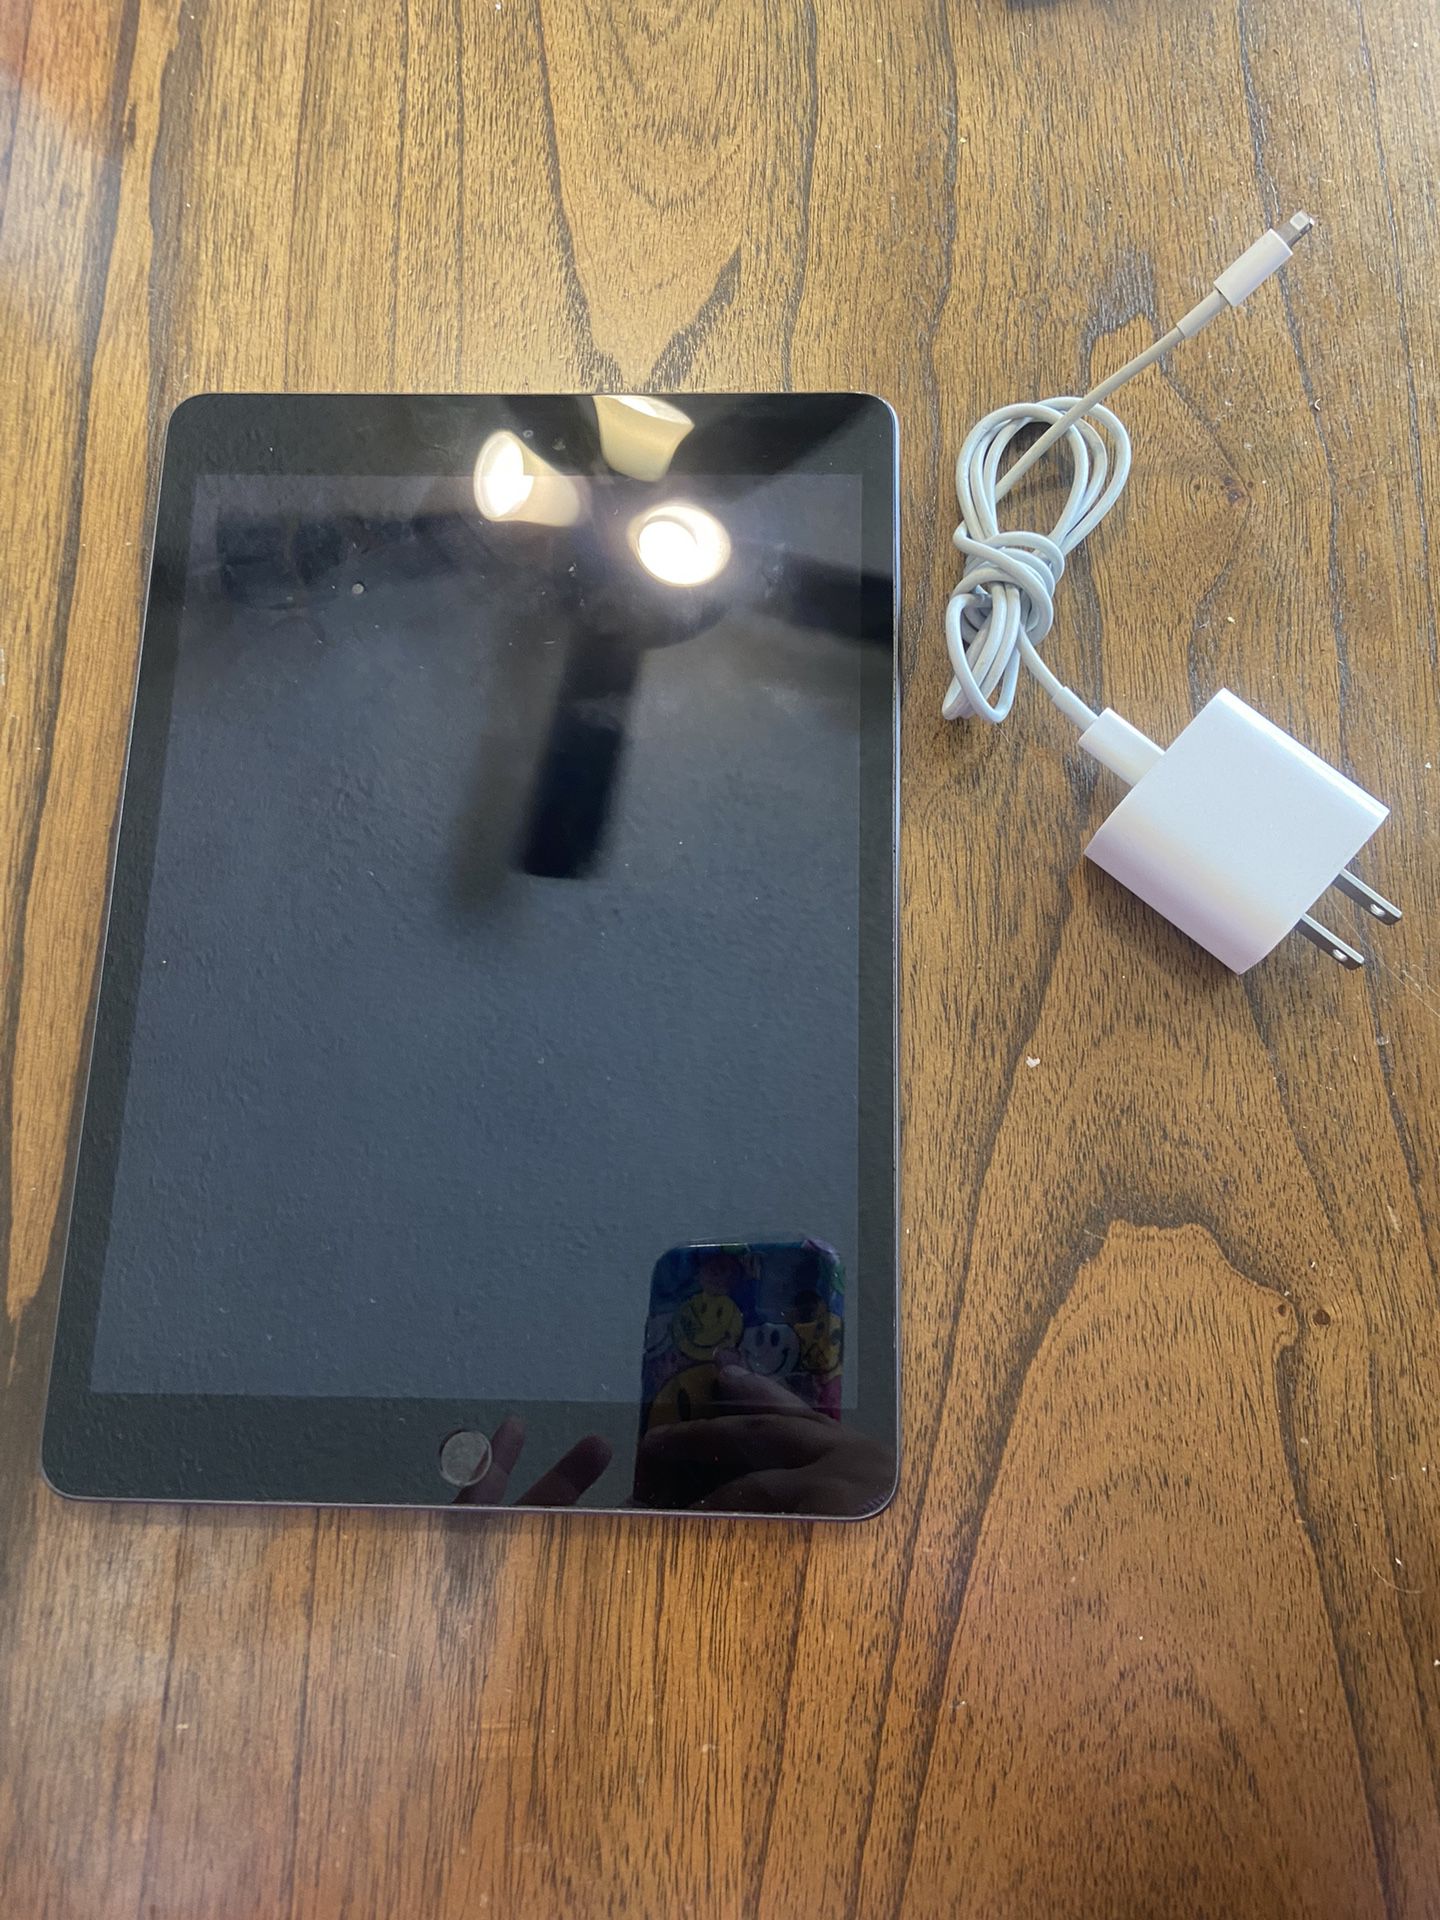 Used Ipad with Charger